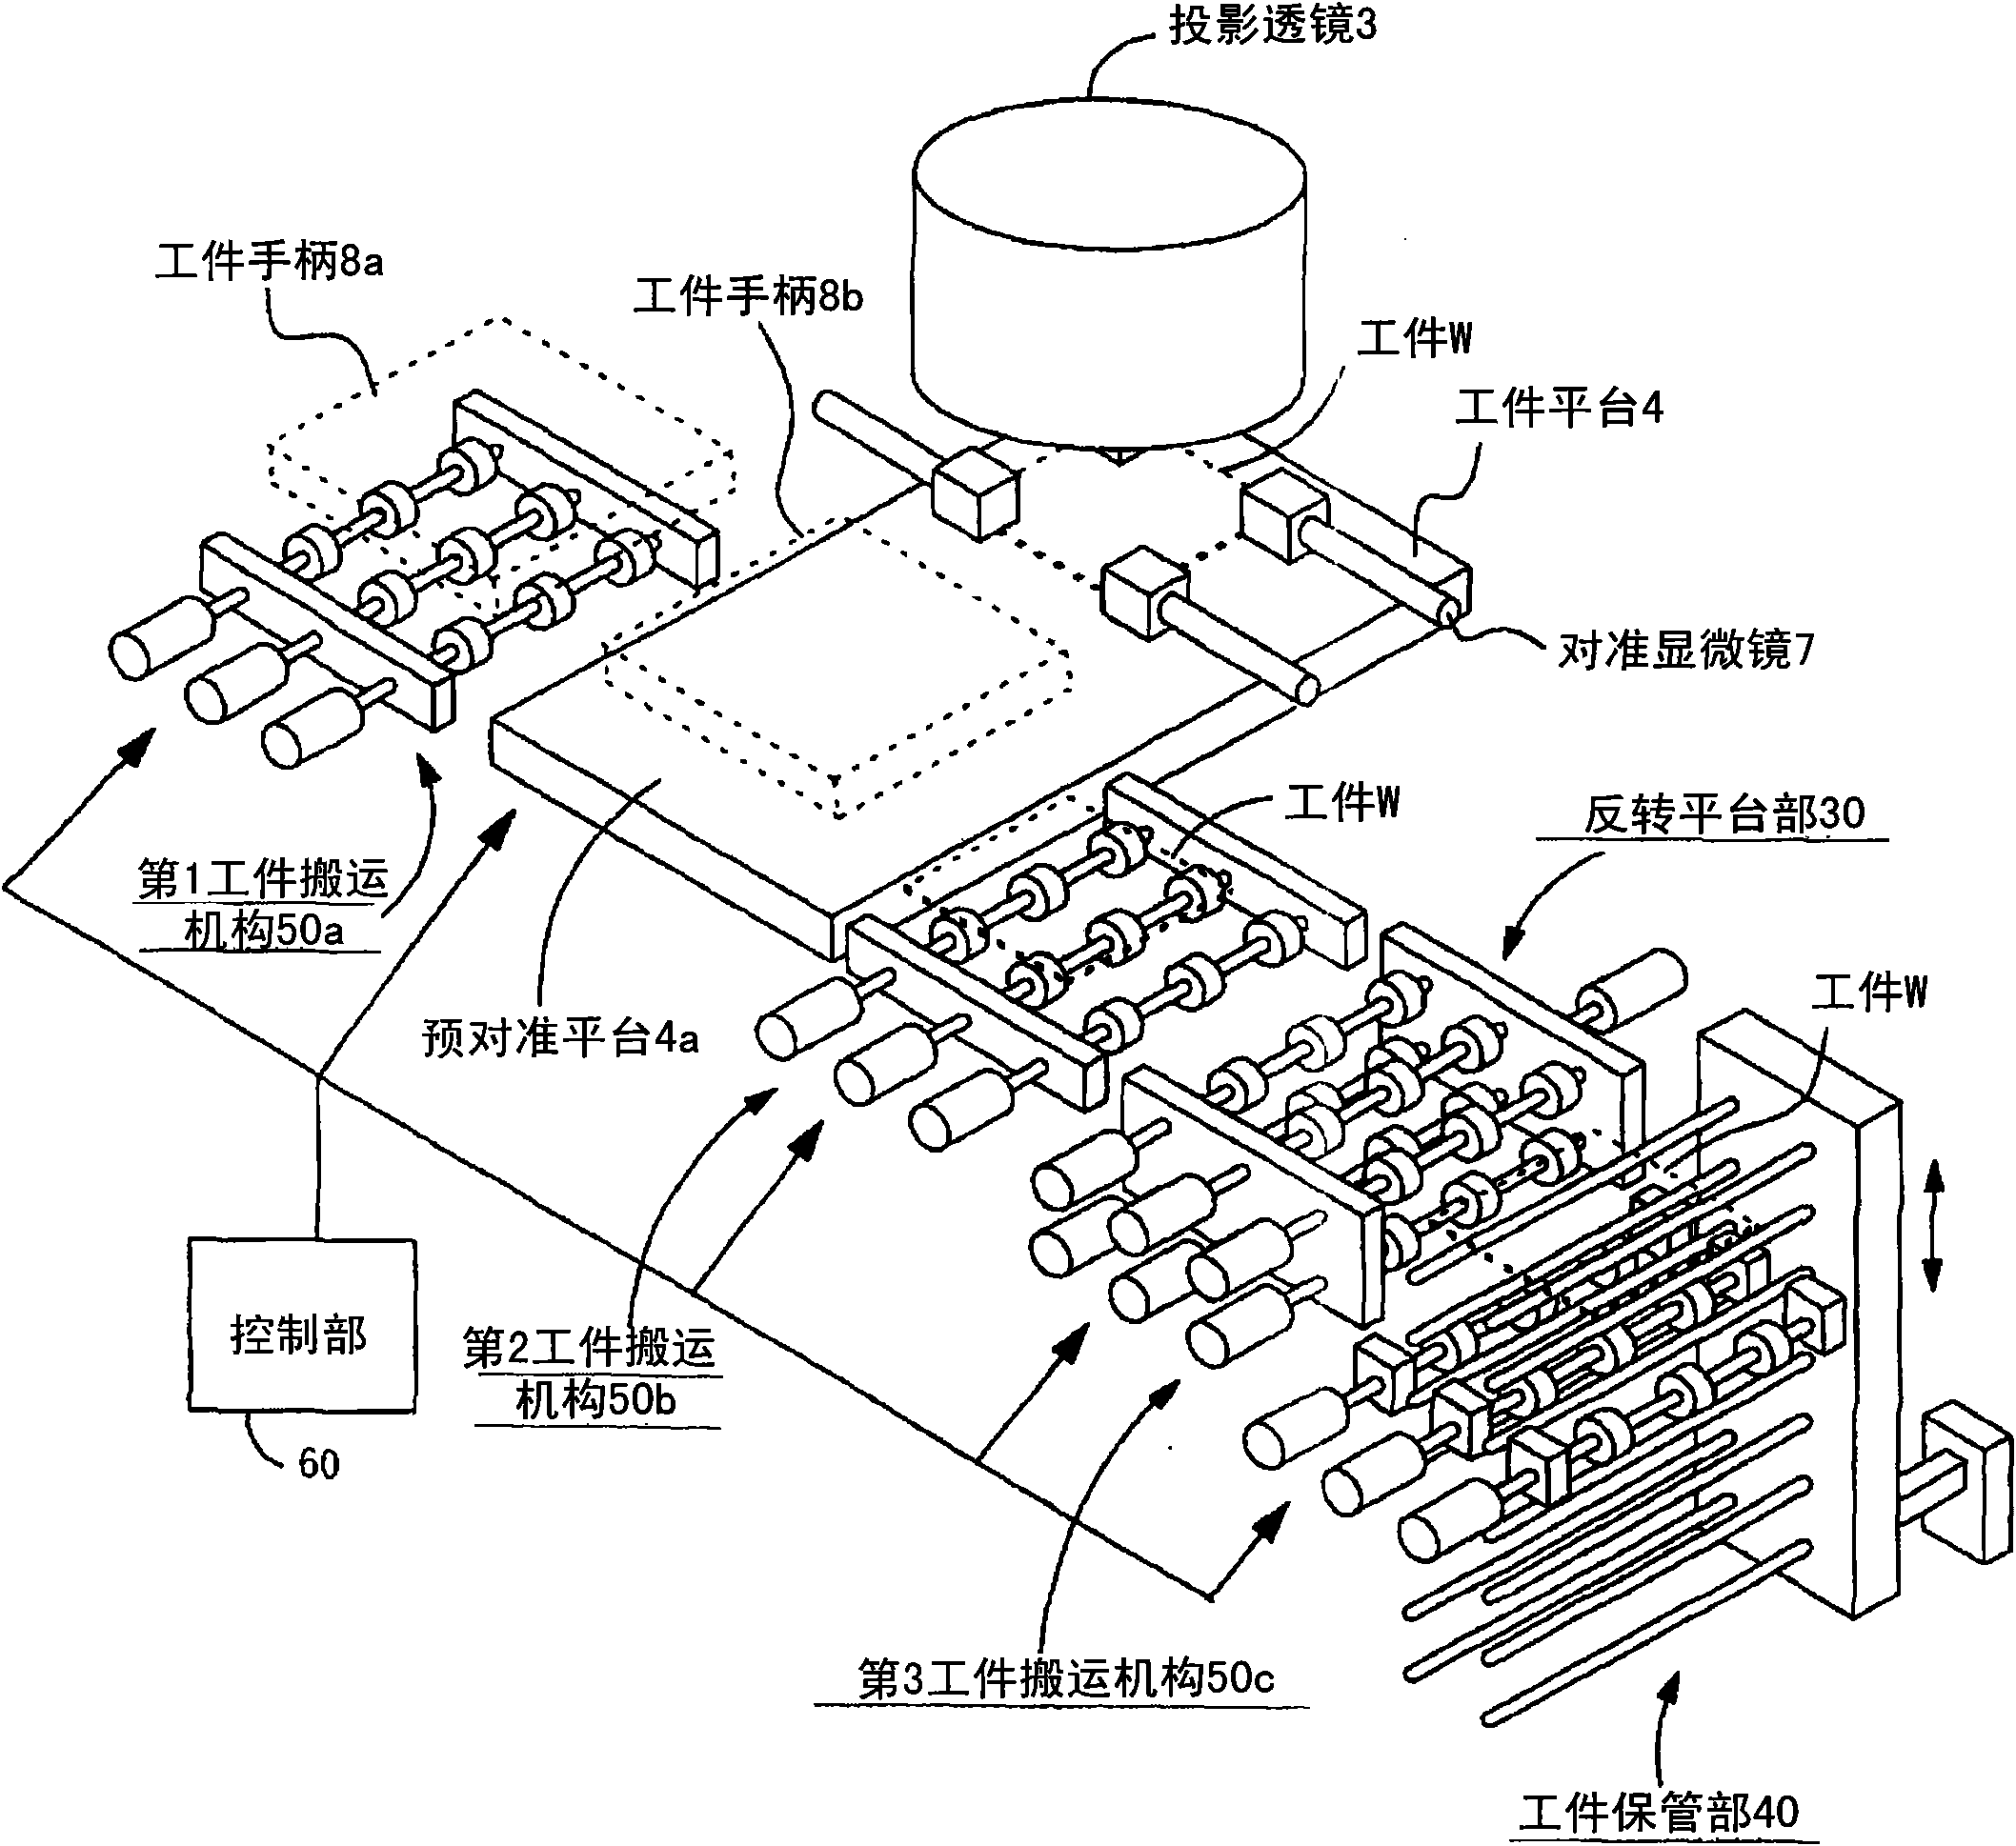 Two-side exposure device